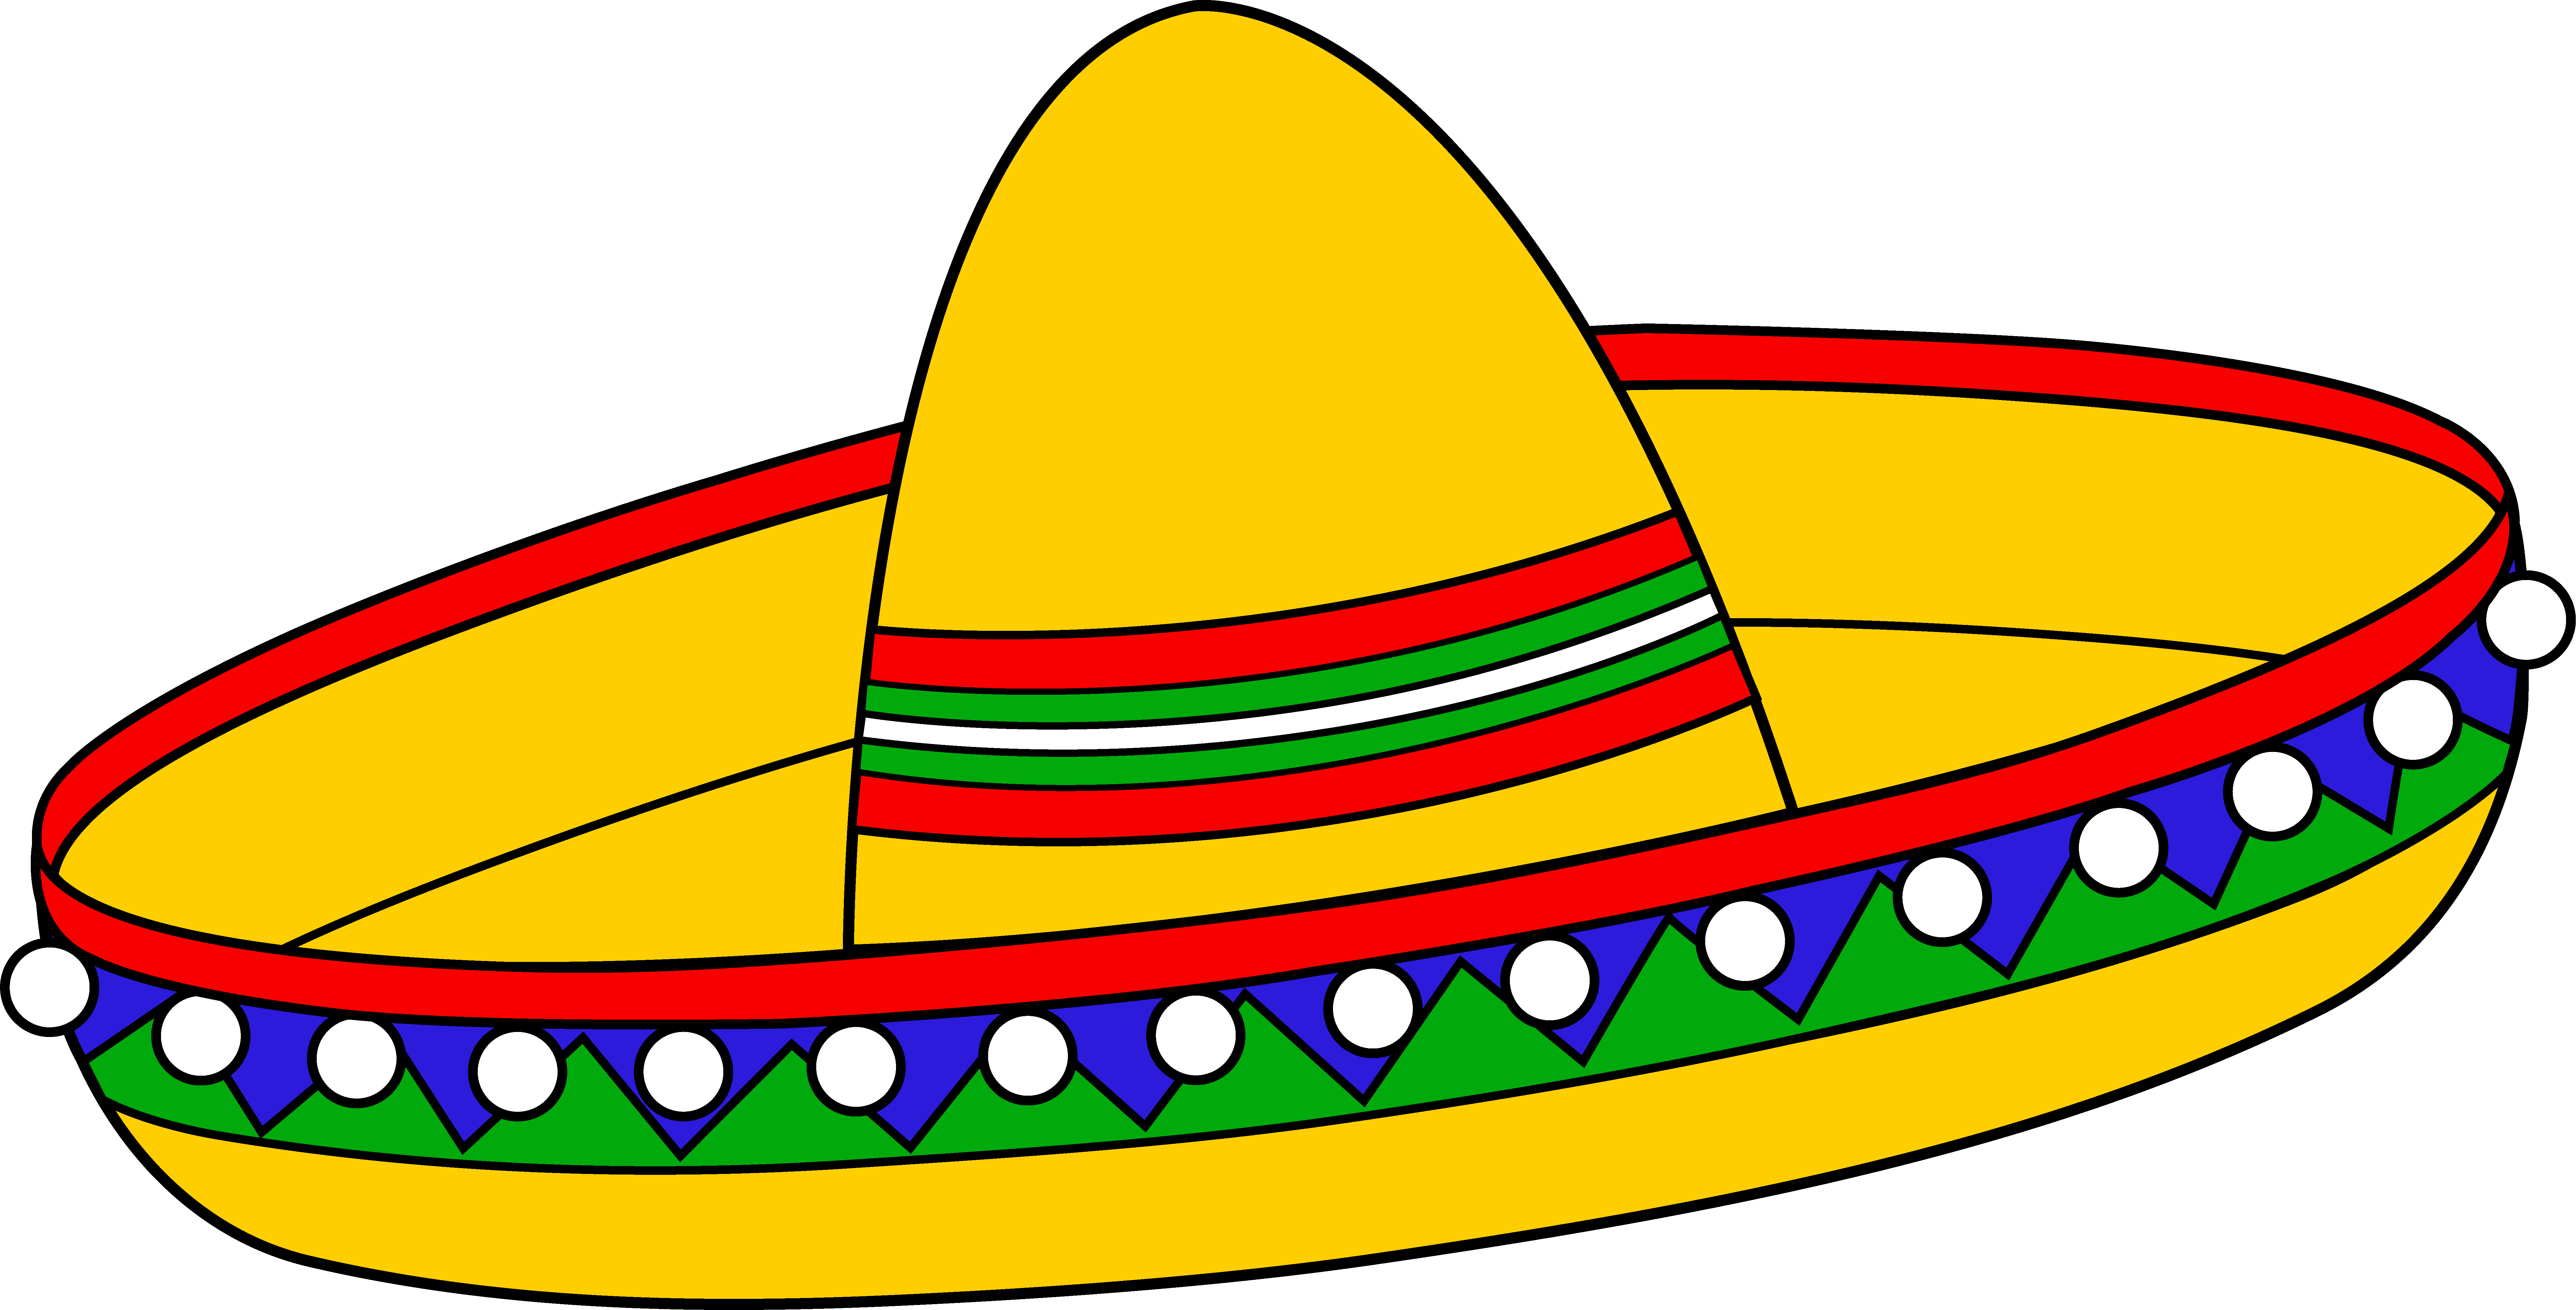 Colorful mexican sombrero hat. Festival clipart bunting